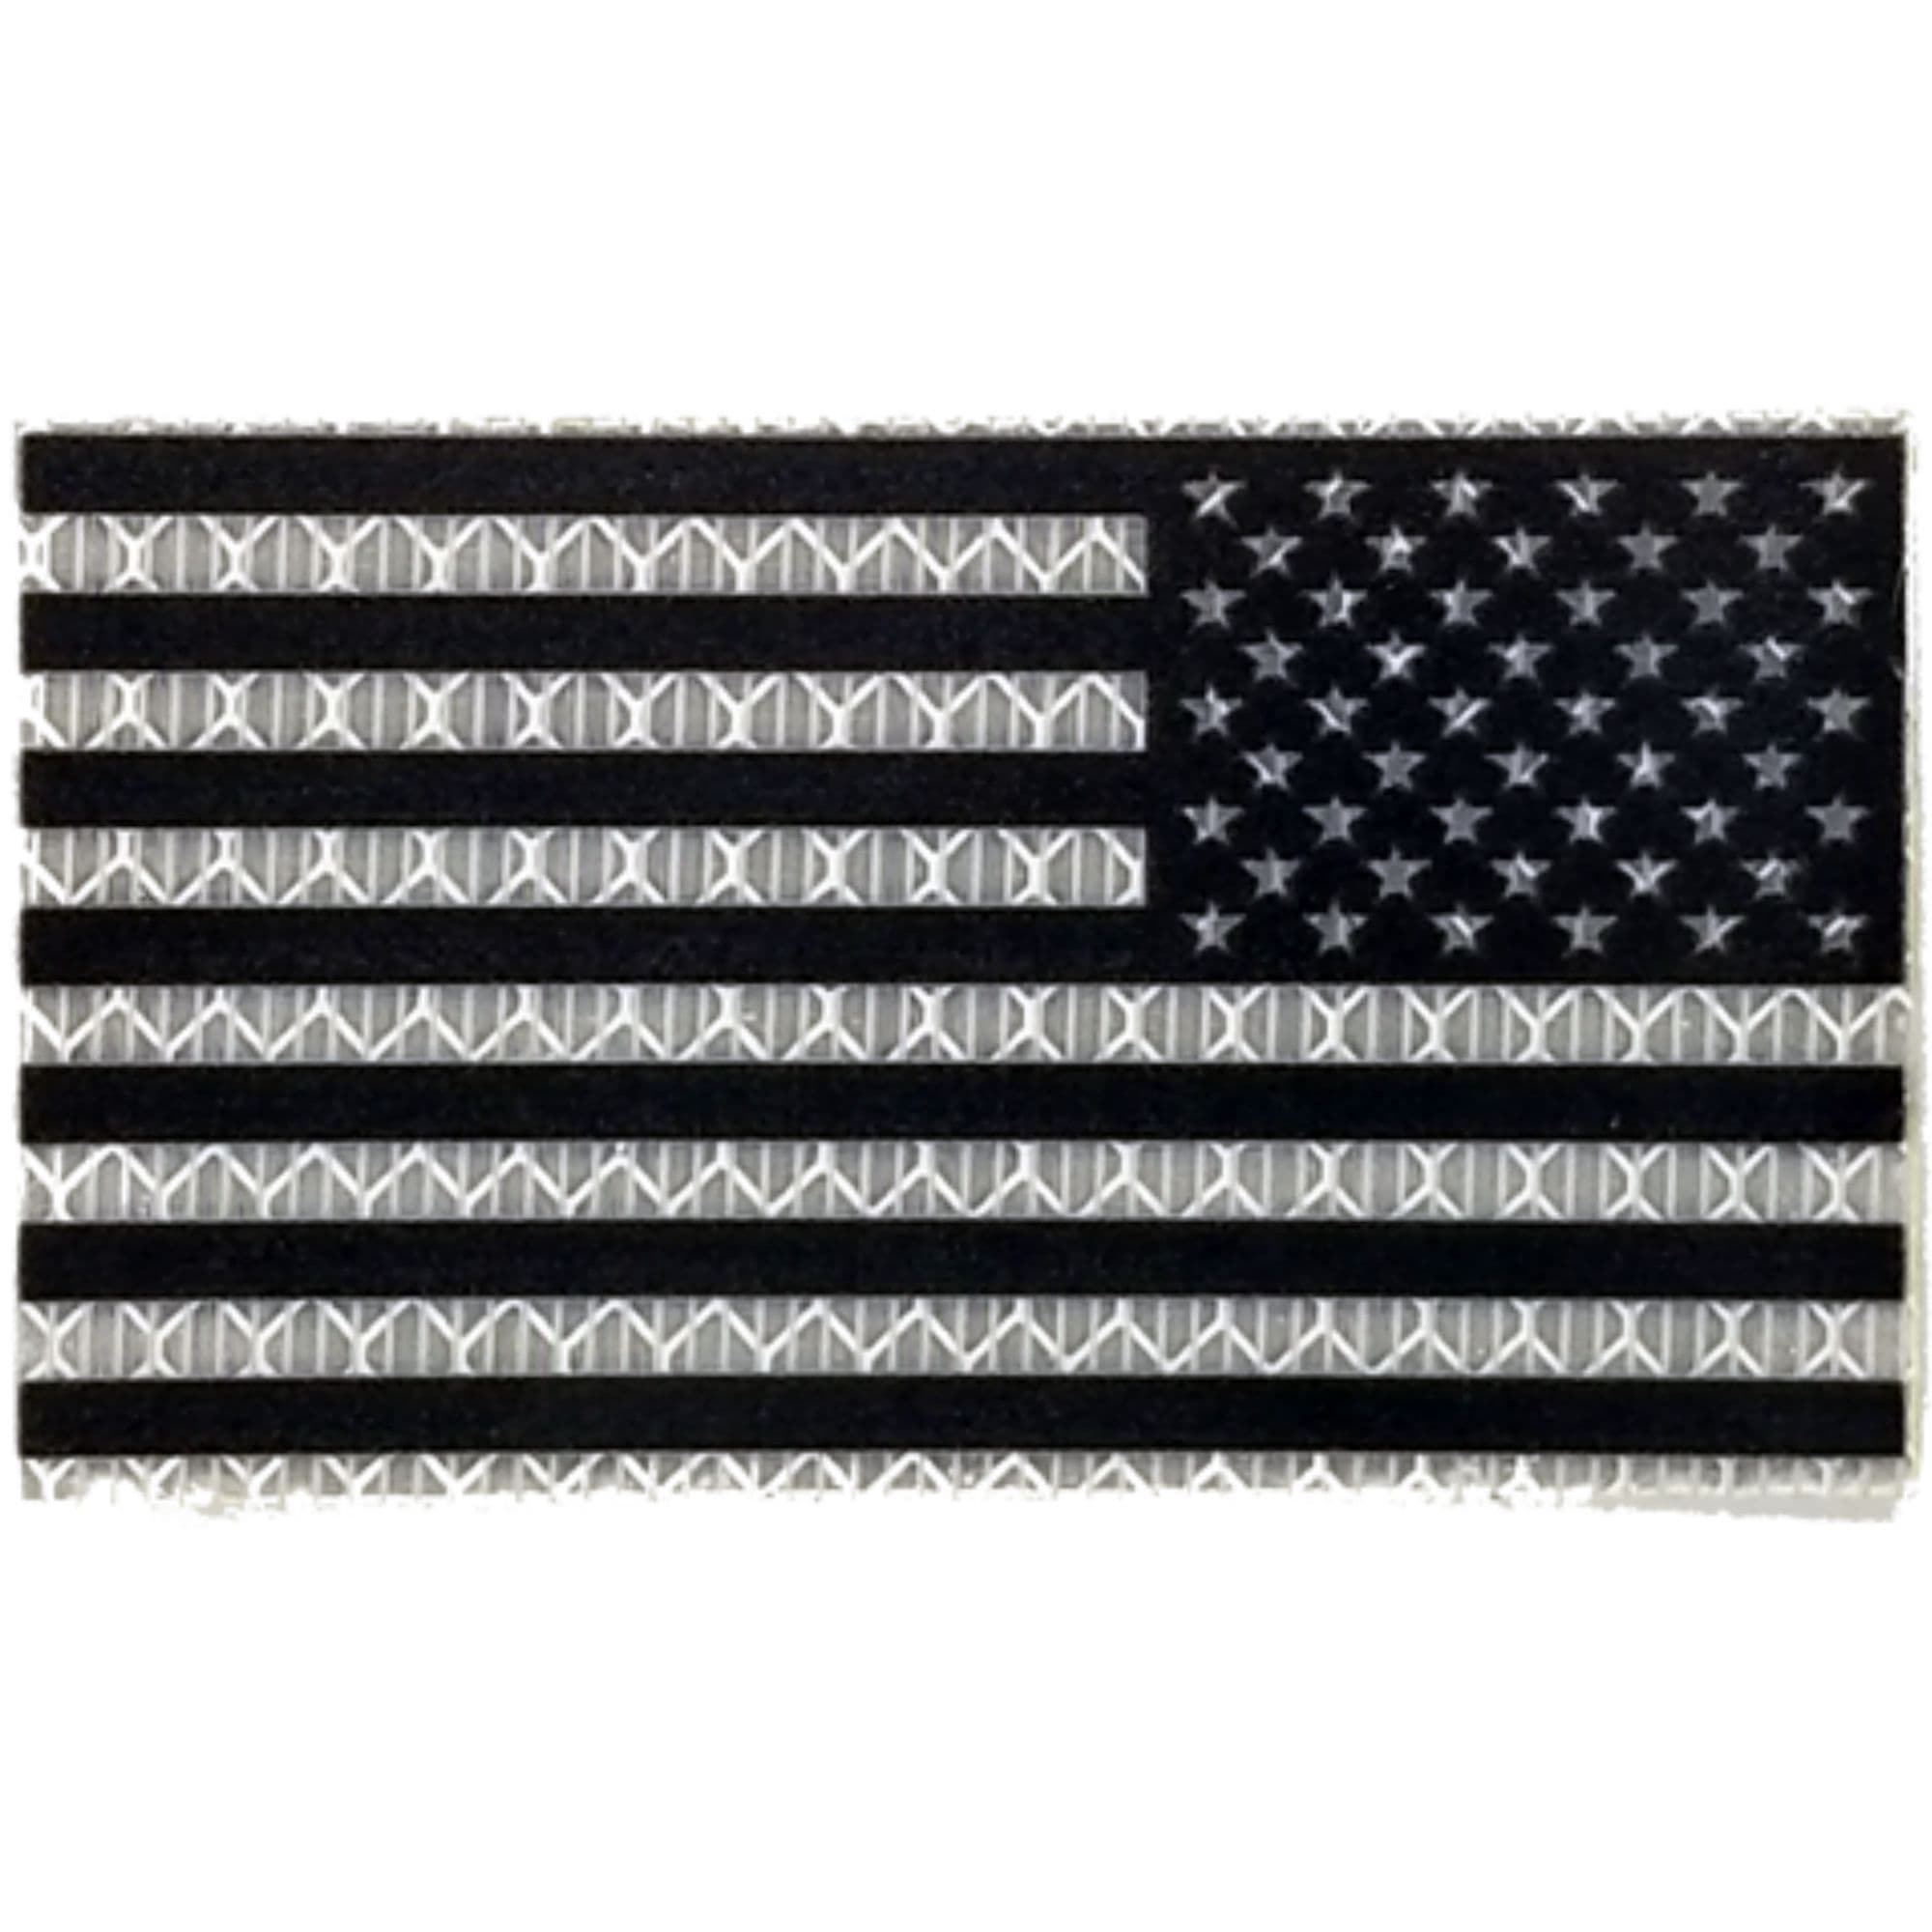 Tactical Gear Junkie Patches Reverse Reflective Printed White/Black USA Flag - 2x3.5 Patch